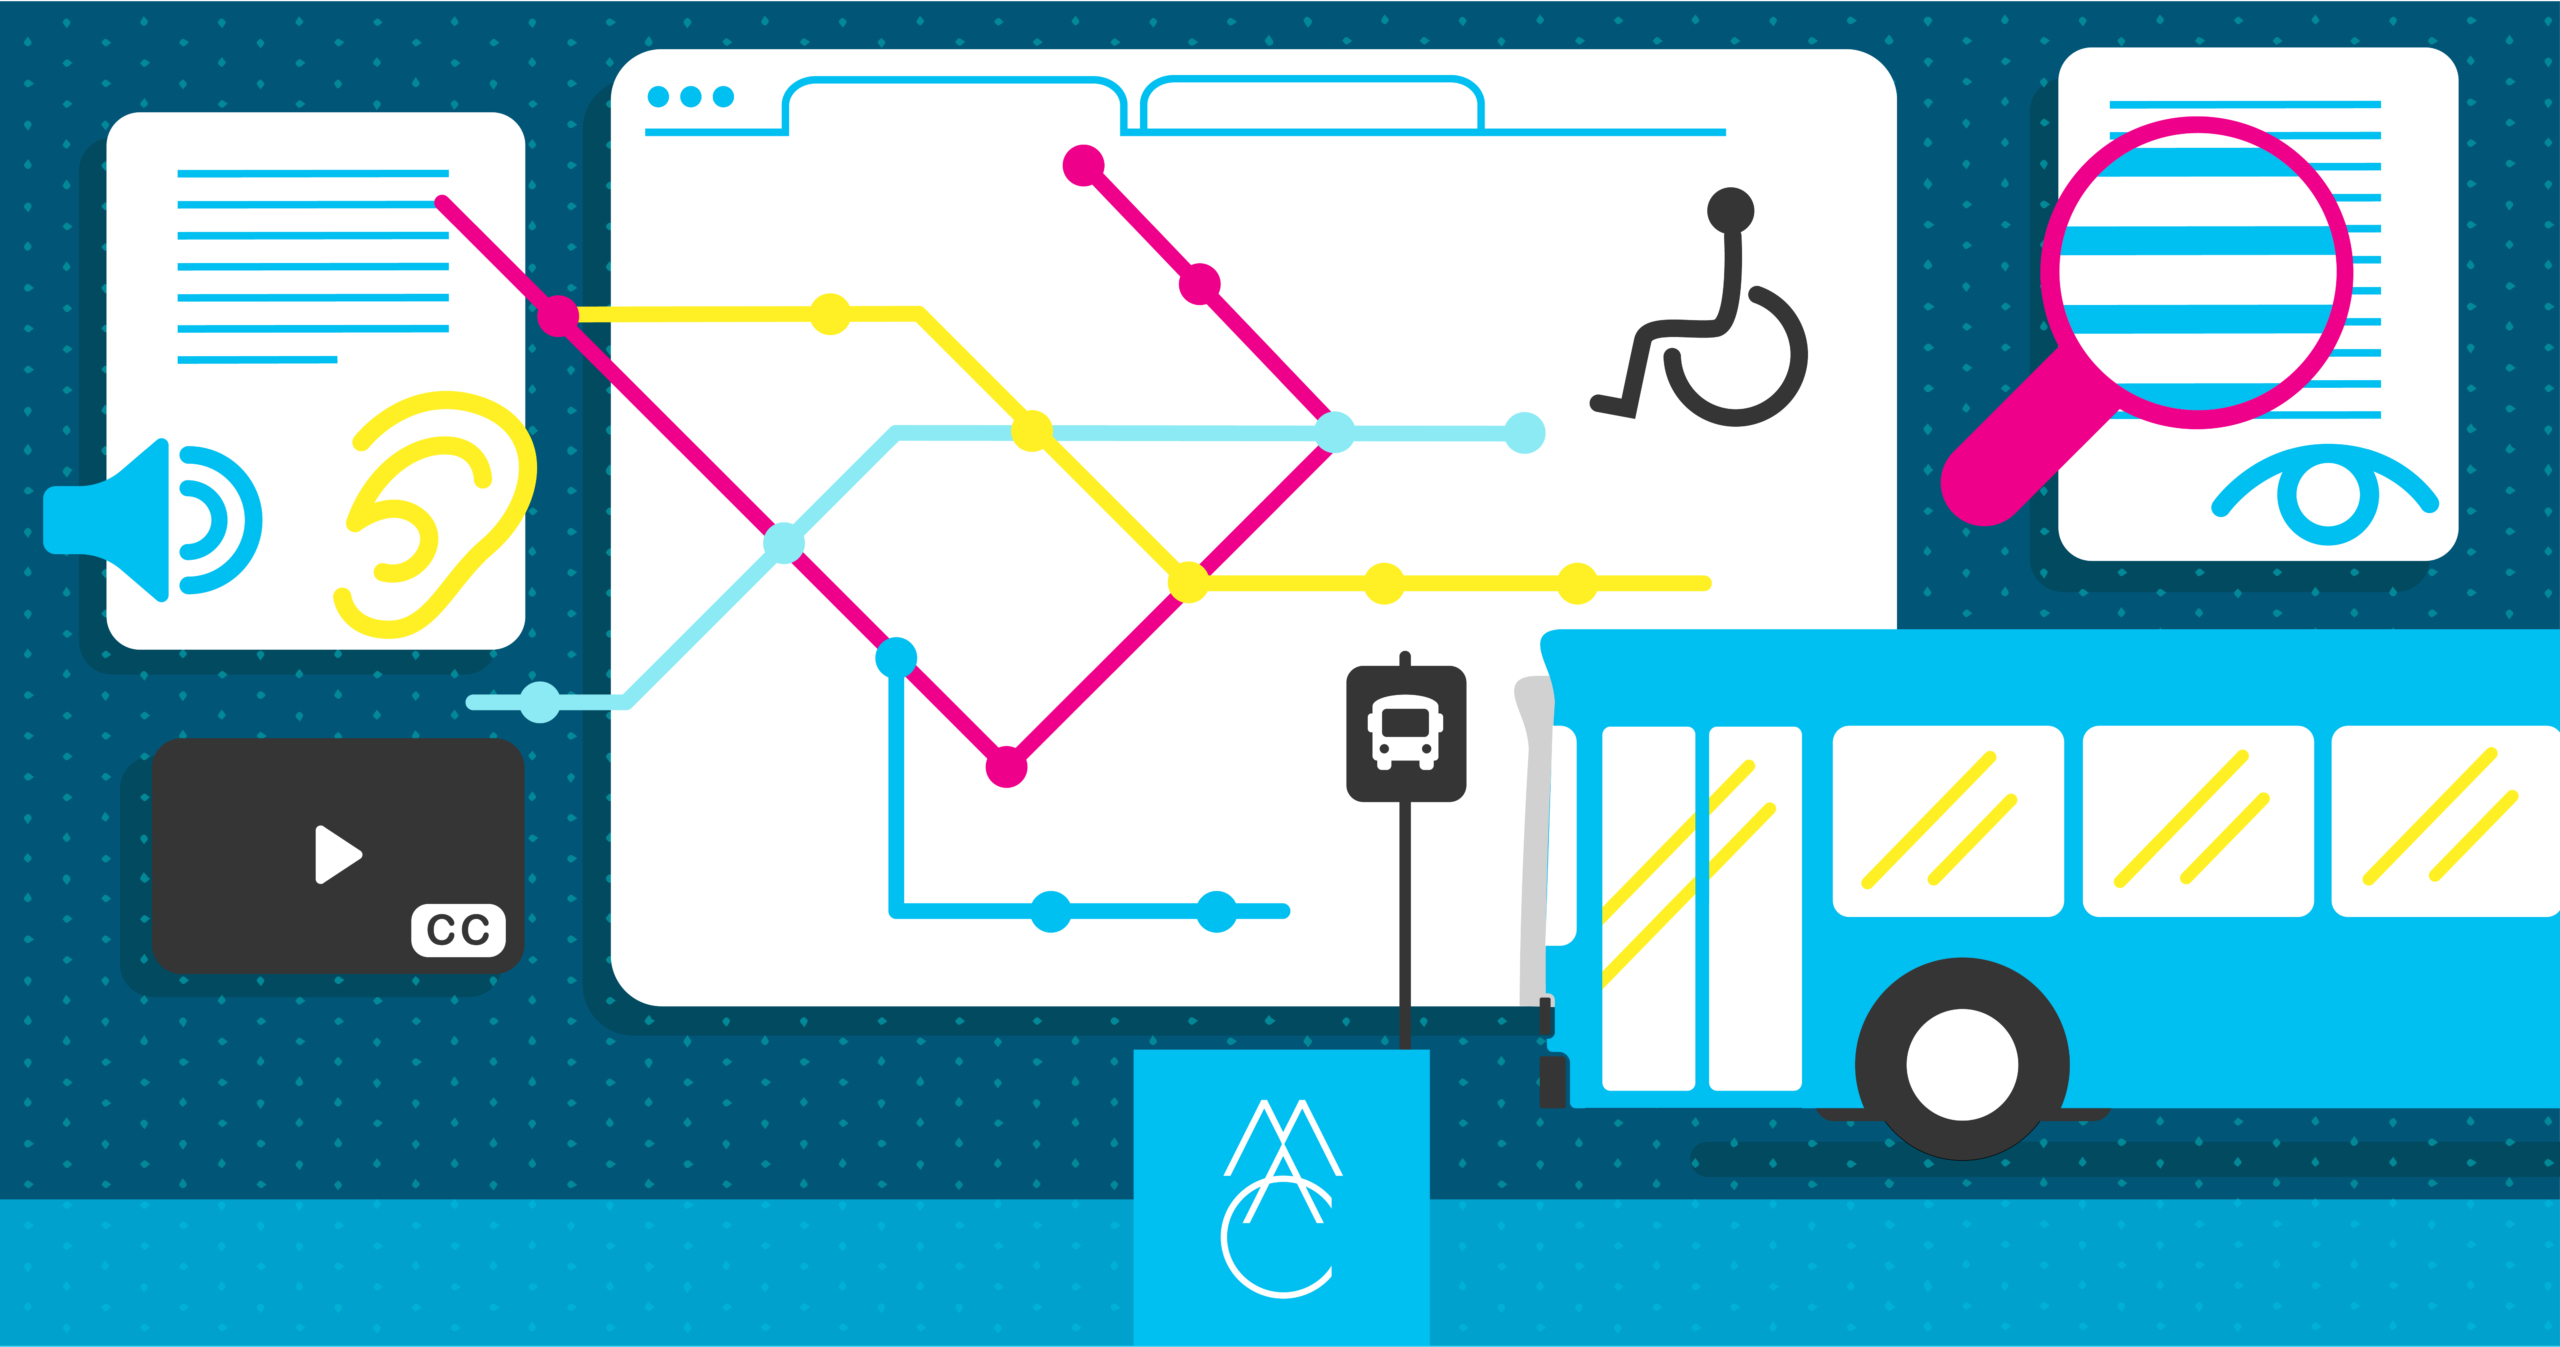 An illustration contains many graphics such as an ear, eye, person in a wheel chair, and a video with closed captions to highlight the importance of an accessible website. These graphics are interacting with a bus and map of bus stations.